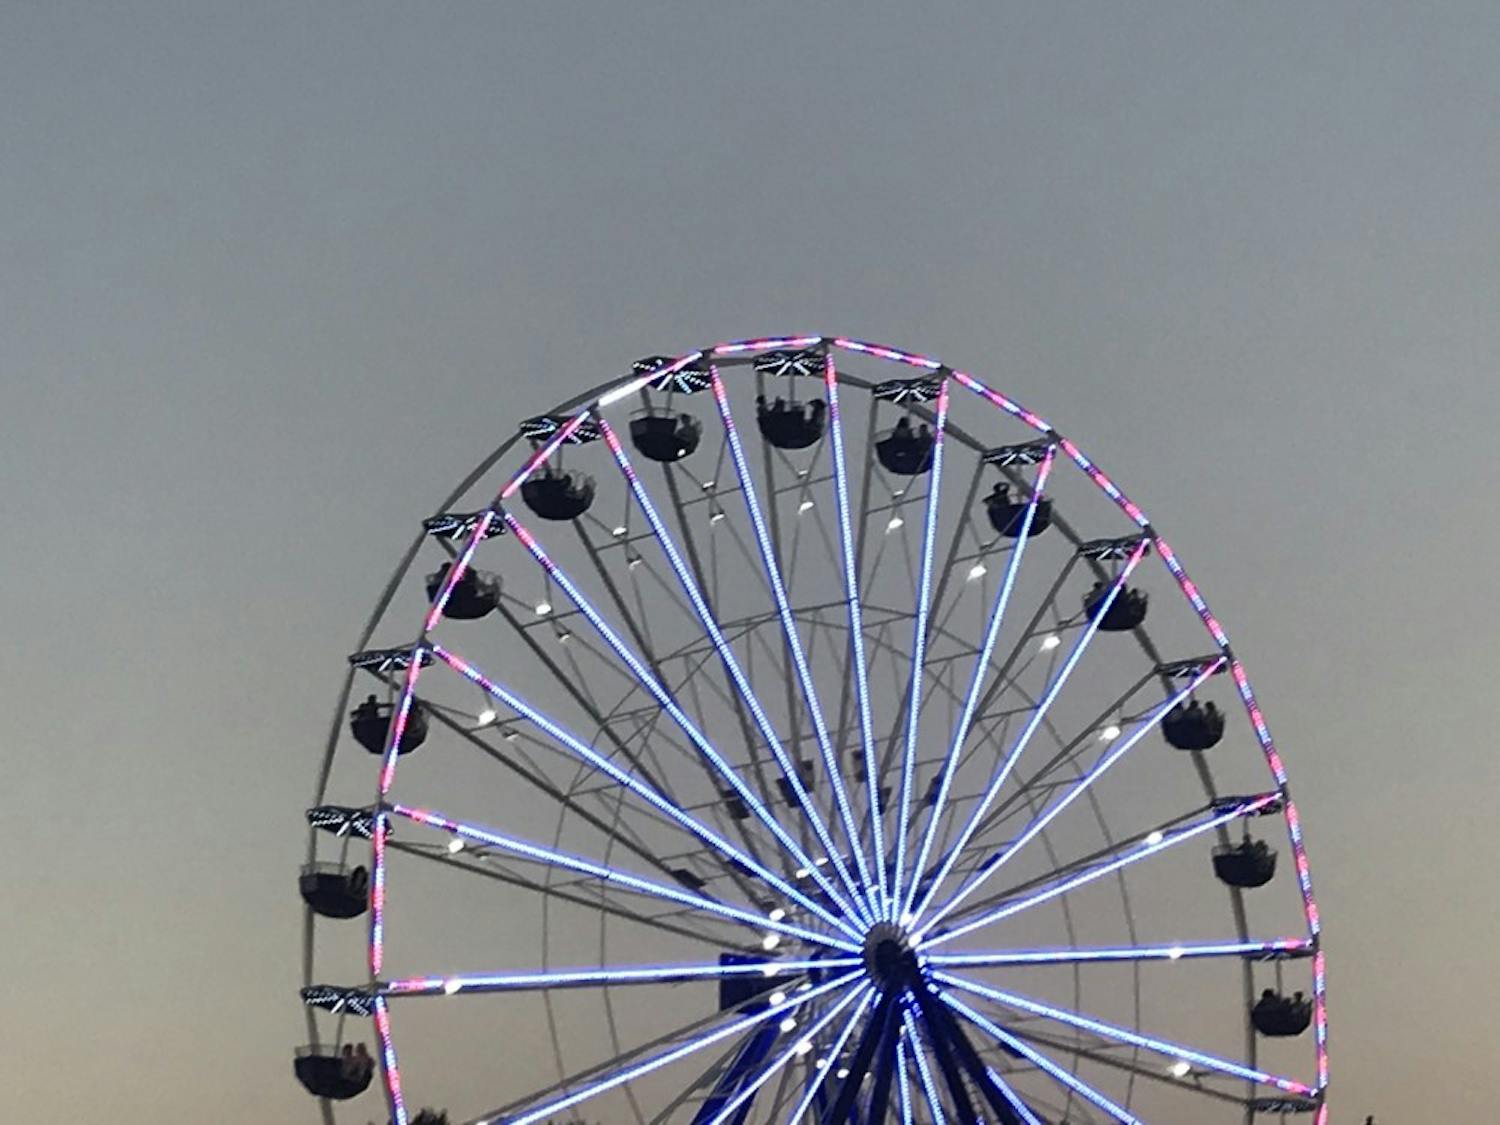 The North Carolina State Fair is celebrating its 150th anniversary this year.